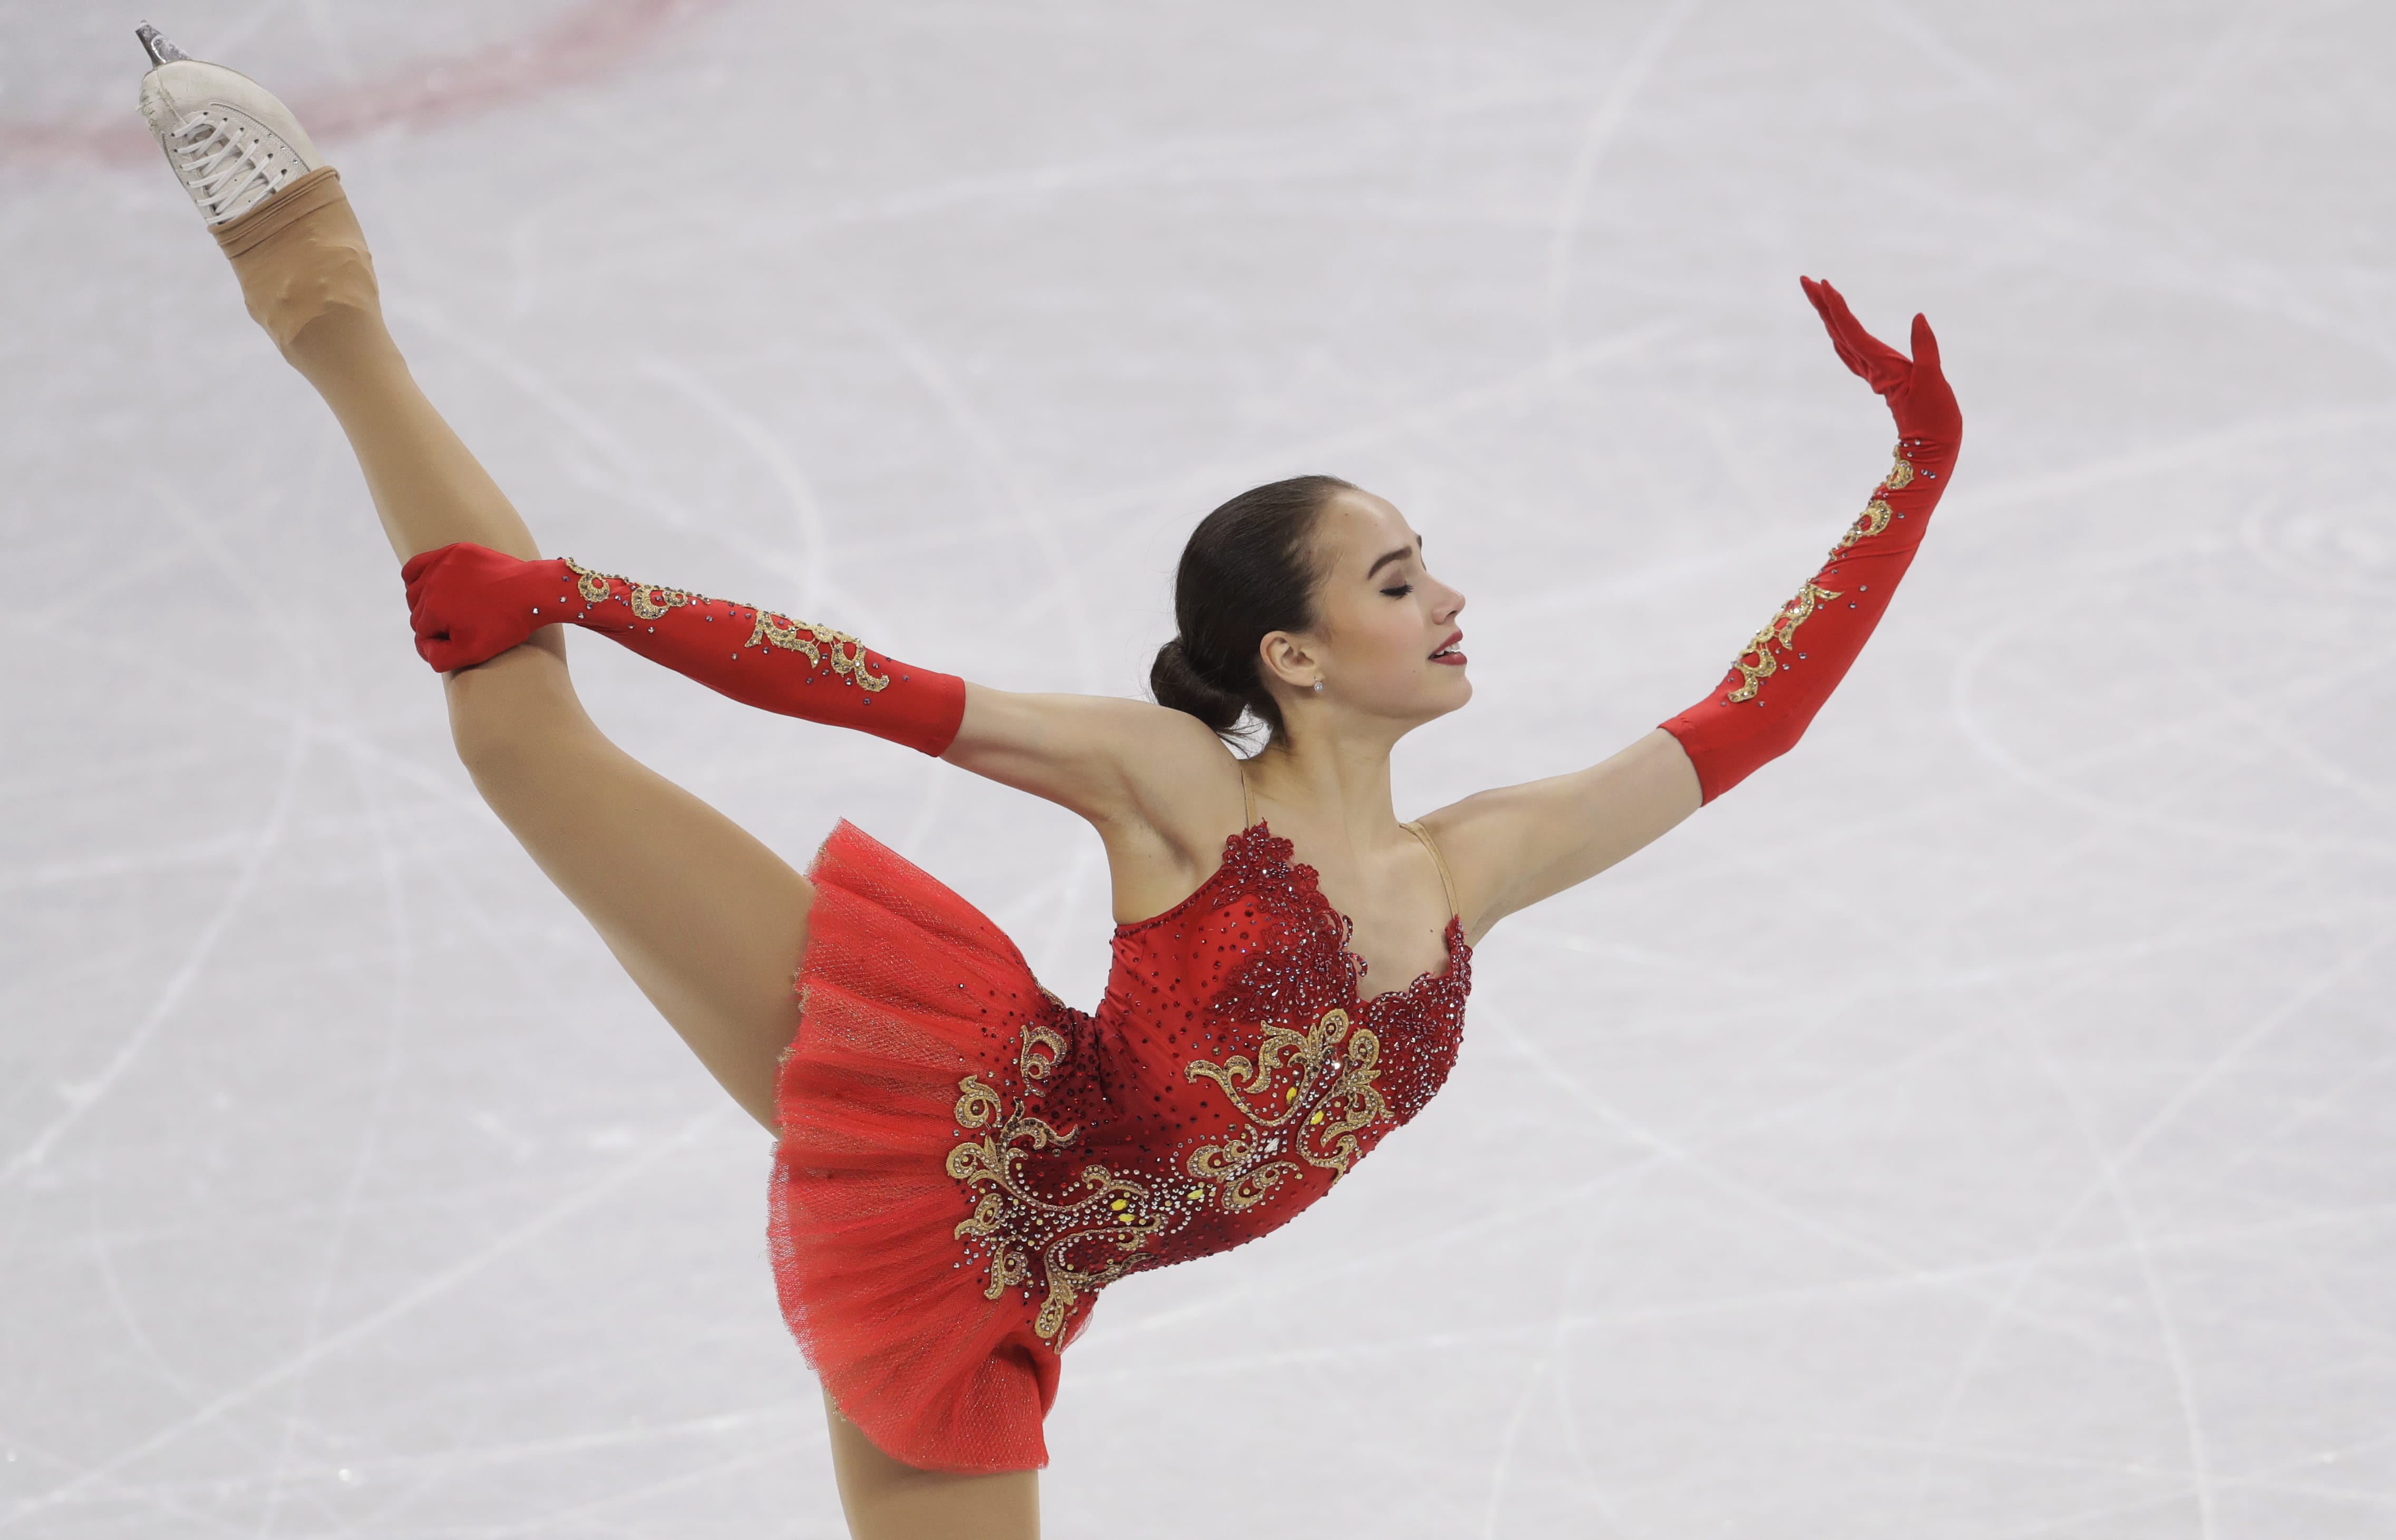 Alina Zagitova of the Olympic Athletes of Russia performs during the women's free figure skating final in the Gangneung Ice Arena at the 2018 Winter Olympics in Gangneung, South Korea, Friday, Feb. 23, 2018.